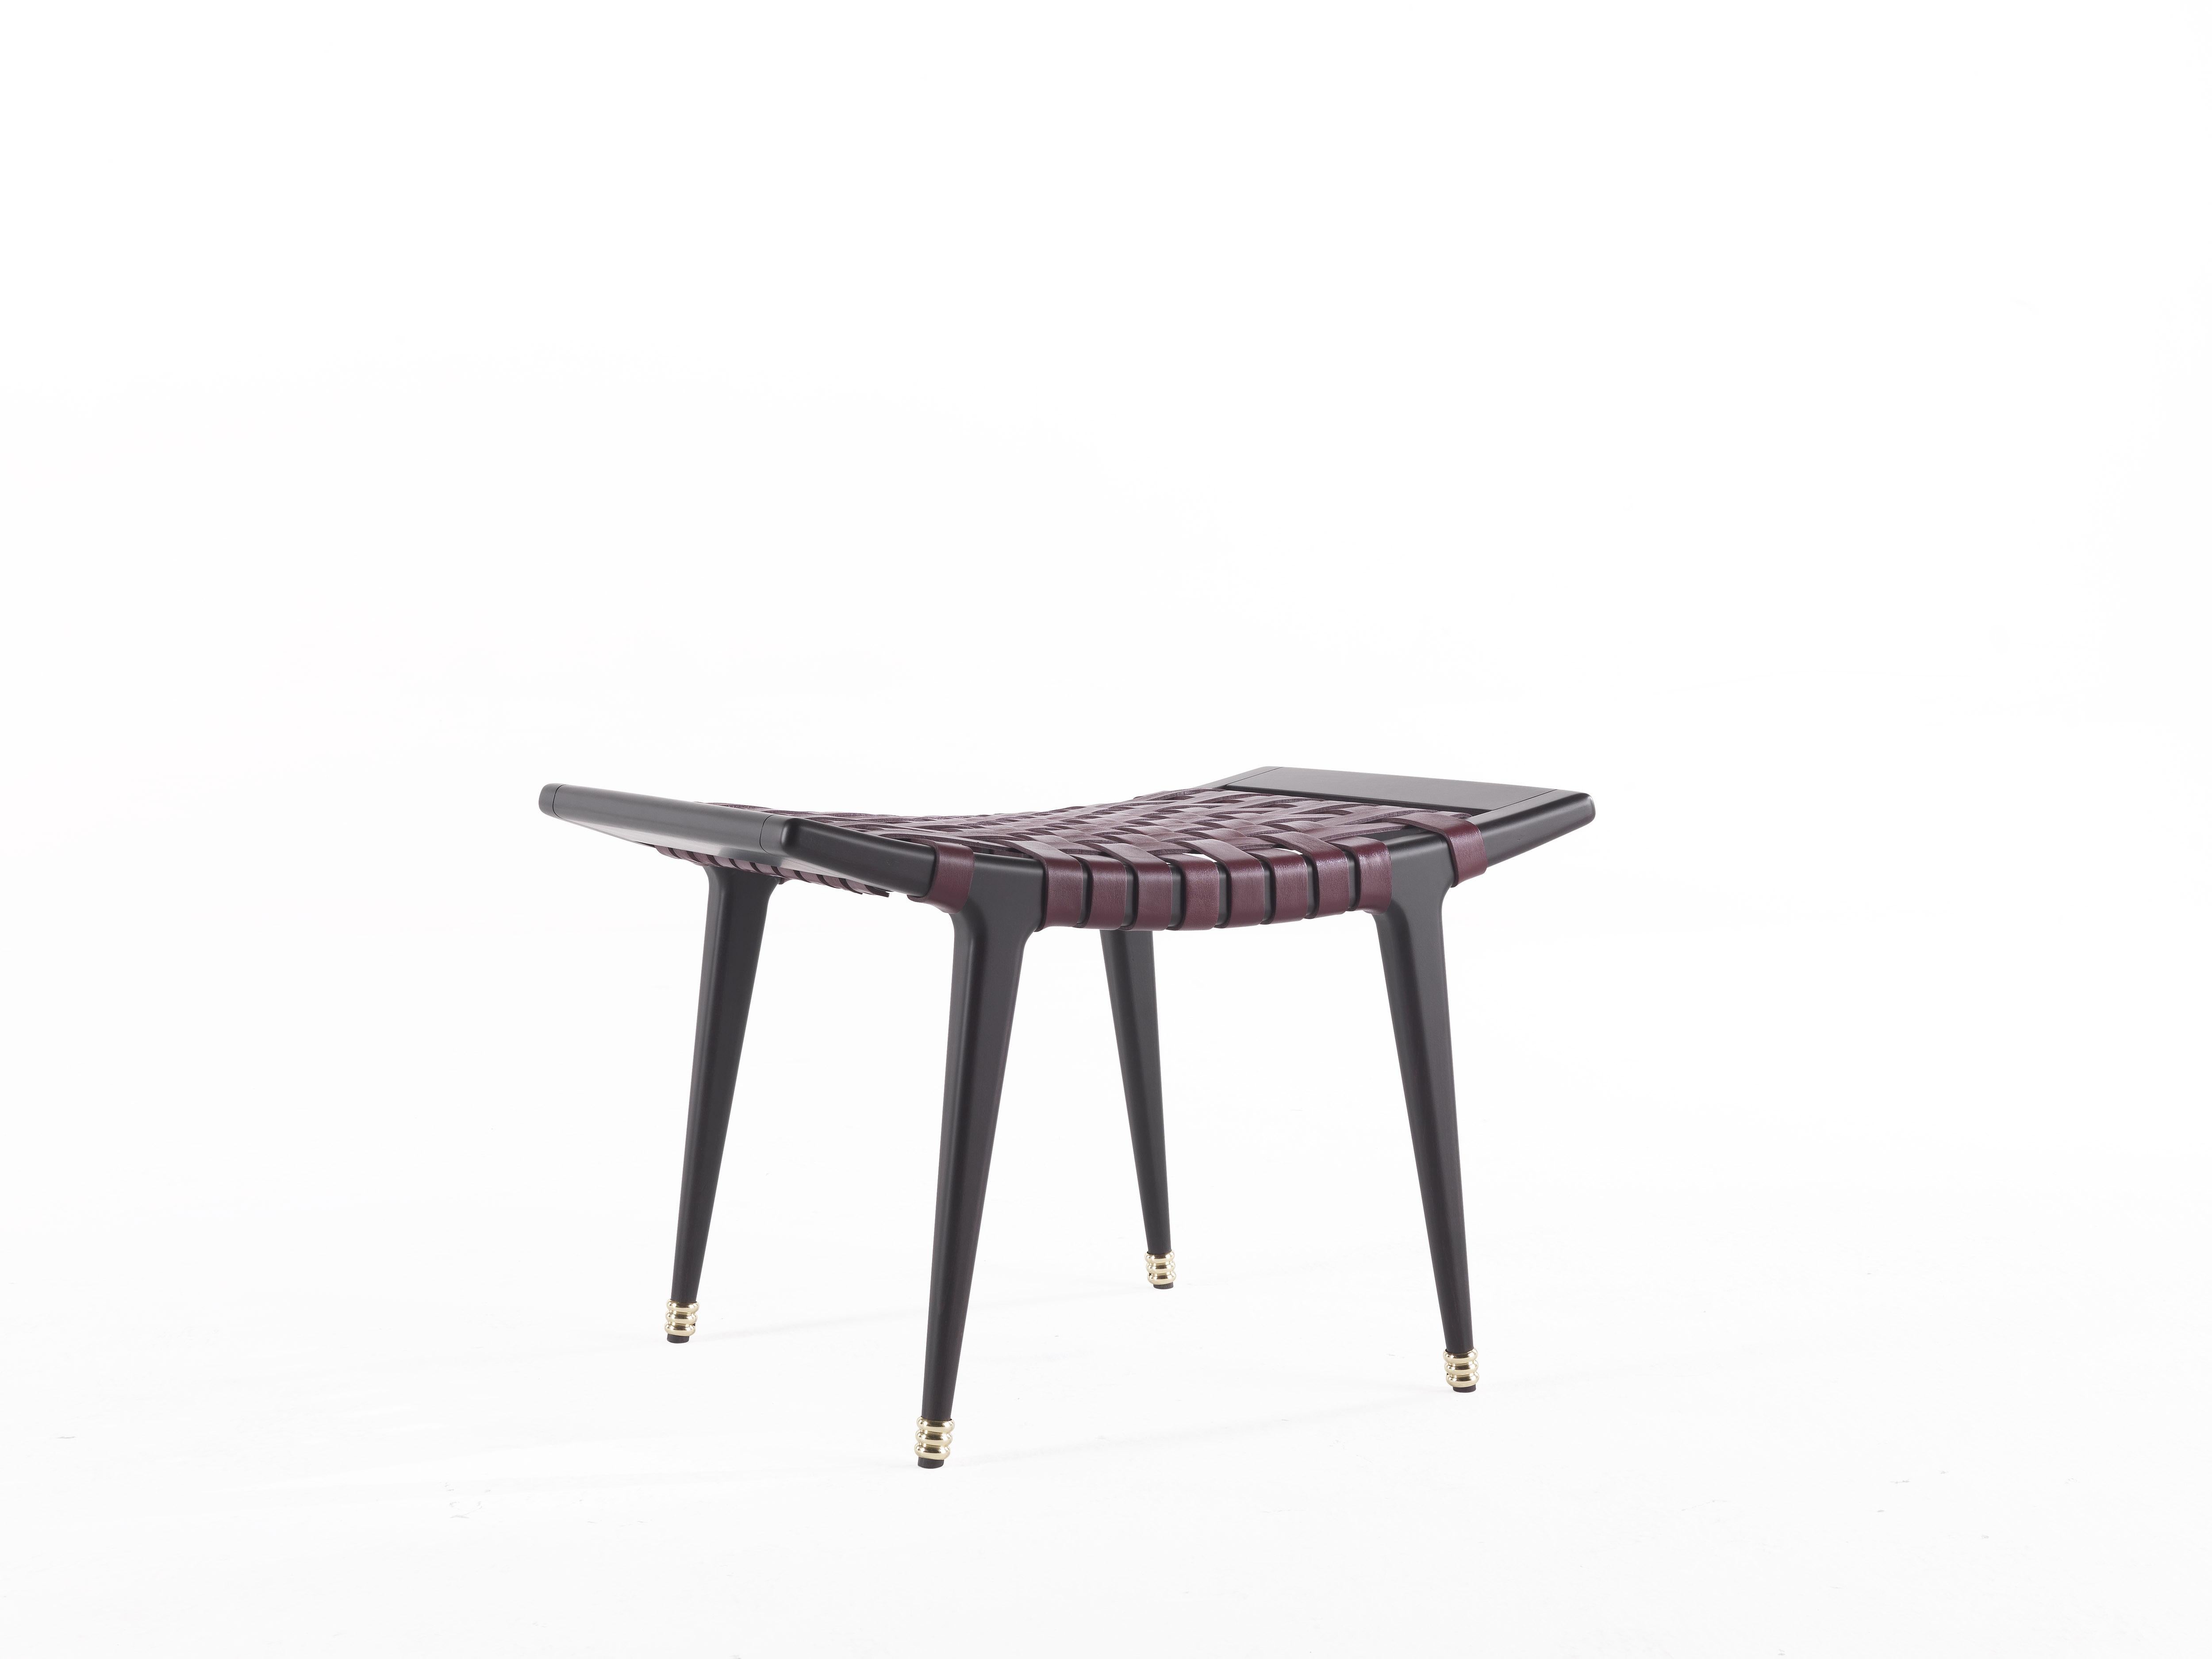 The leather twist is the main feature of the Dinka stool. The African inspiration is present in the matte finish of the dark wengè wood, in the polished brass rings reminding the jewels of the African tribes and in the warm colors evoking the